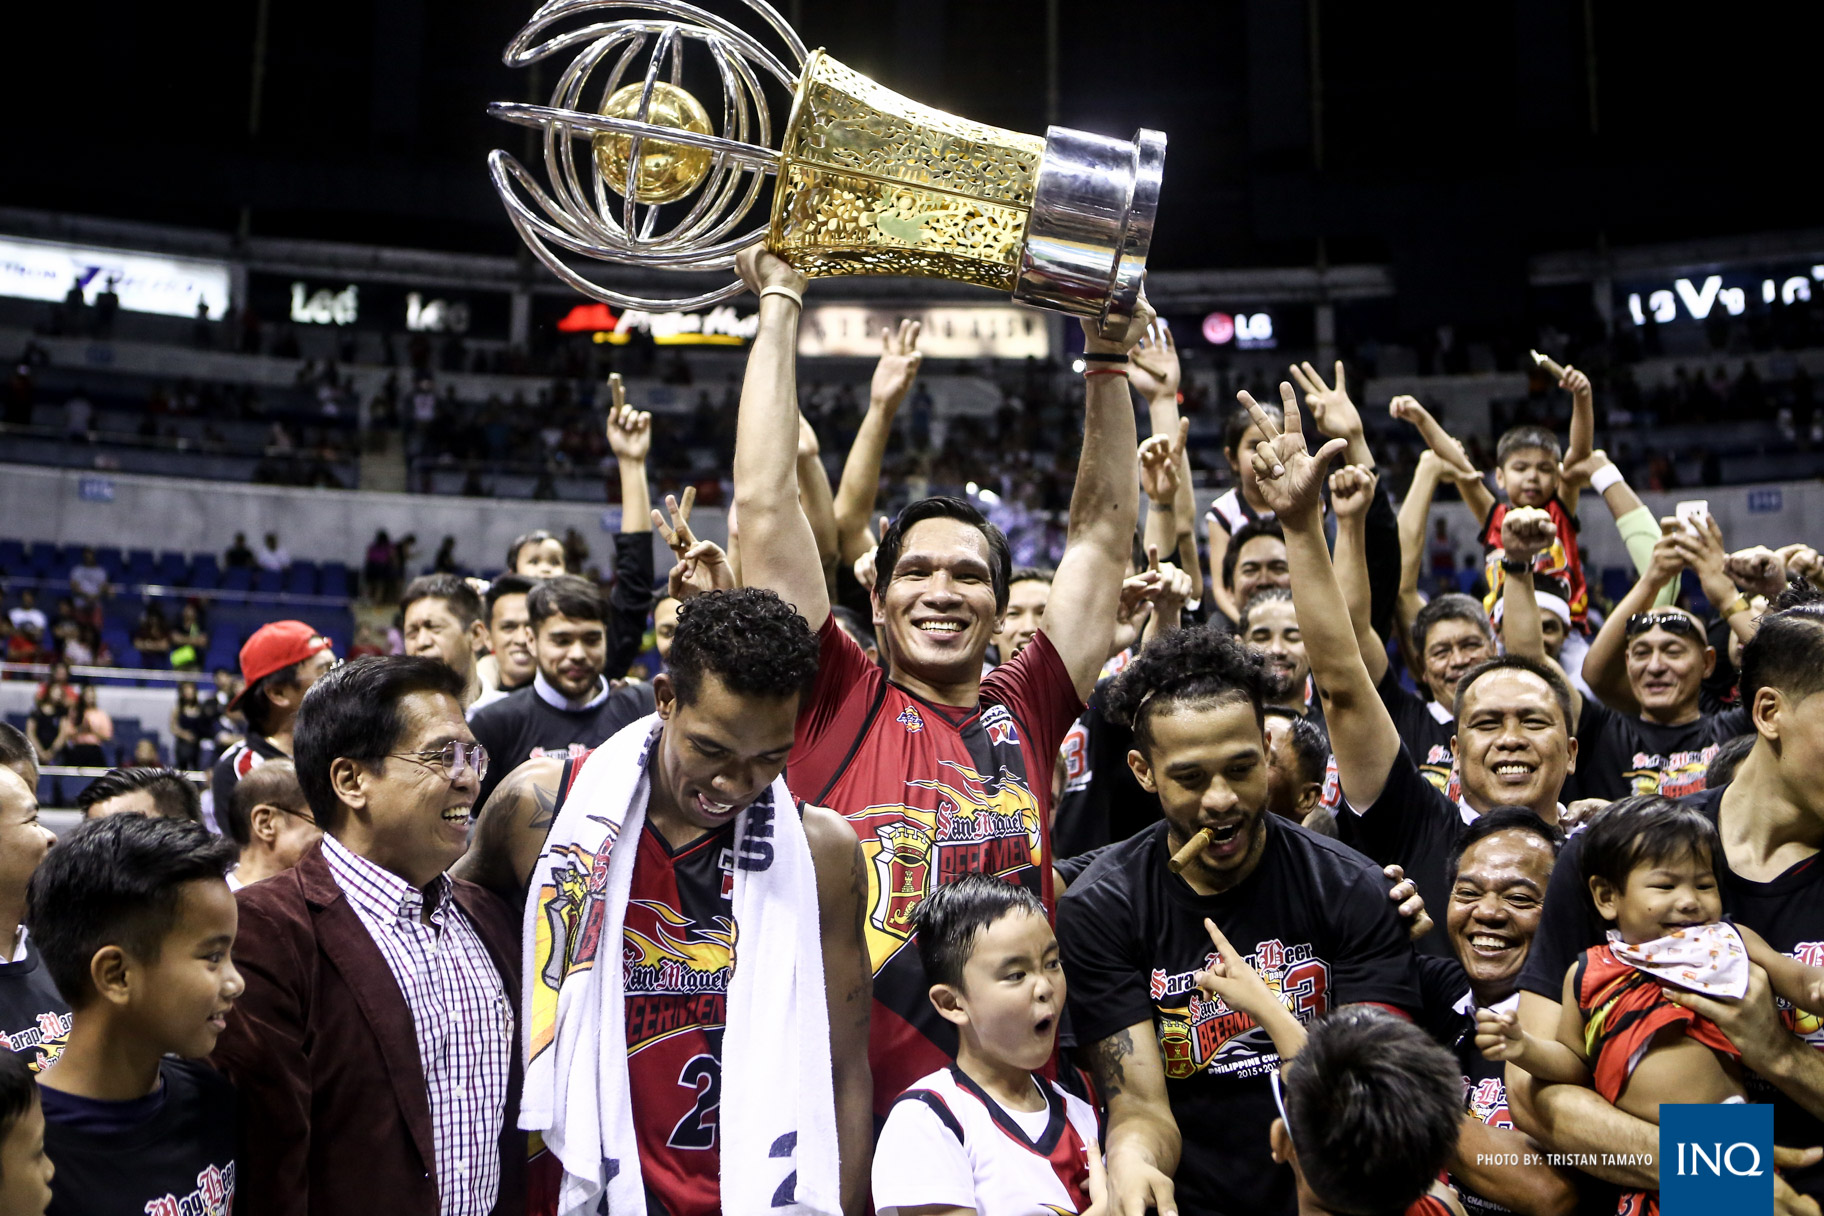 San Miguel Beer center June Mar Fajardo lifts the Perpetual Trophy after the Beermen beat the Barangay Ginebra Gin Kings in Game 5 of the 2017 PBA Philippine Cup Finals on Sunday, March 5, 2017, at Smart Araneta Coliseum. Tristan Tamayo/INQUIRER.net